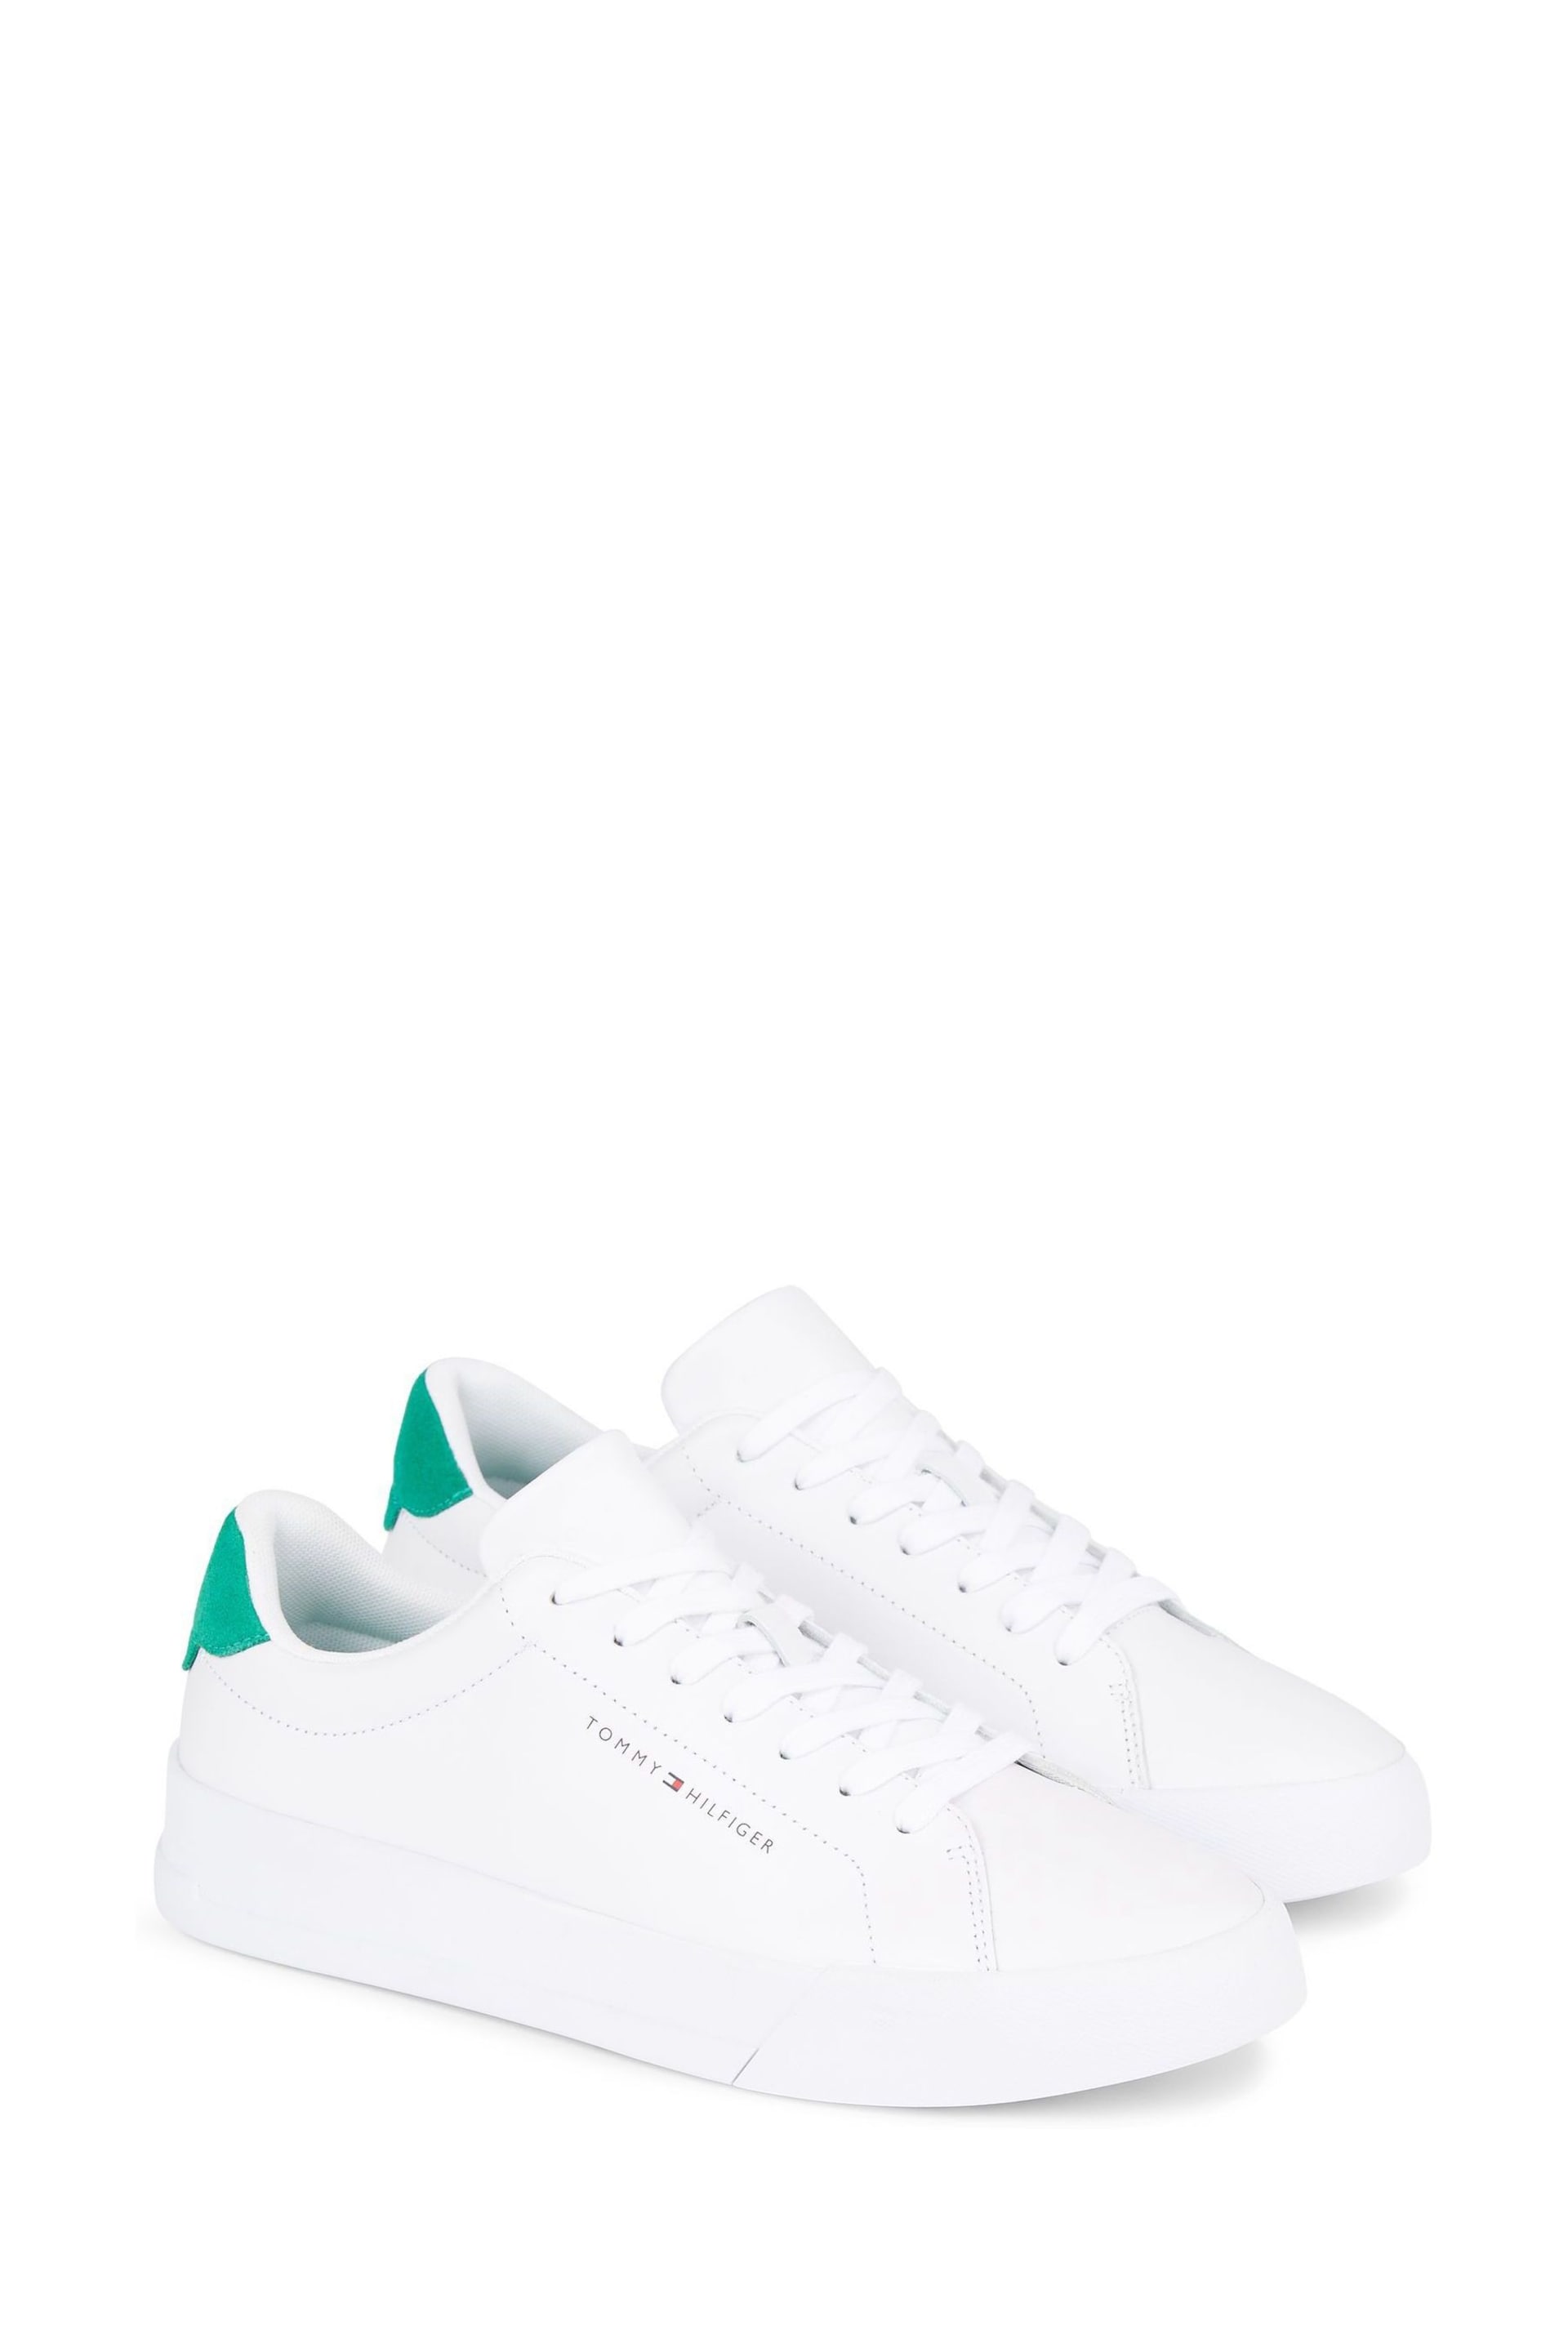 Tommy Hilfiger White Court Leather Sneakers - Image 2 of 4